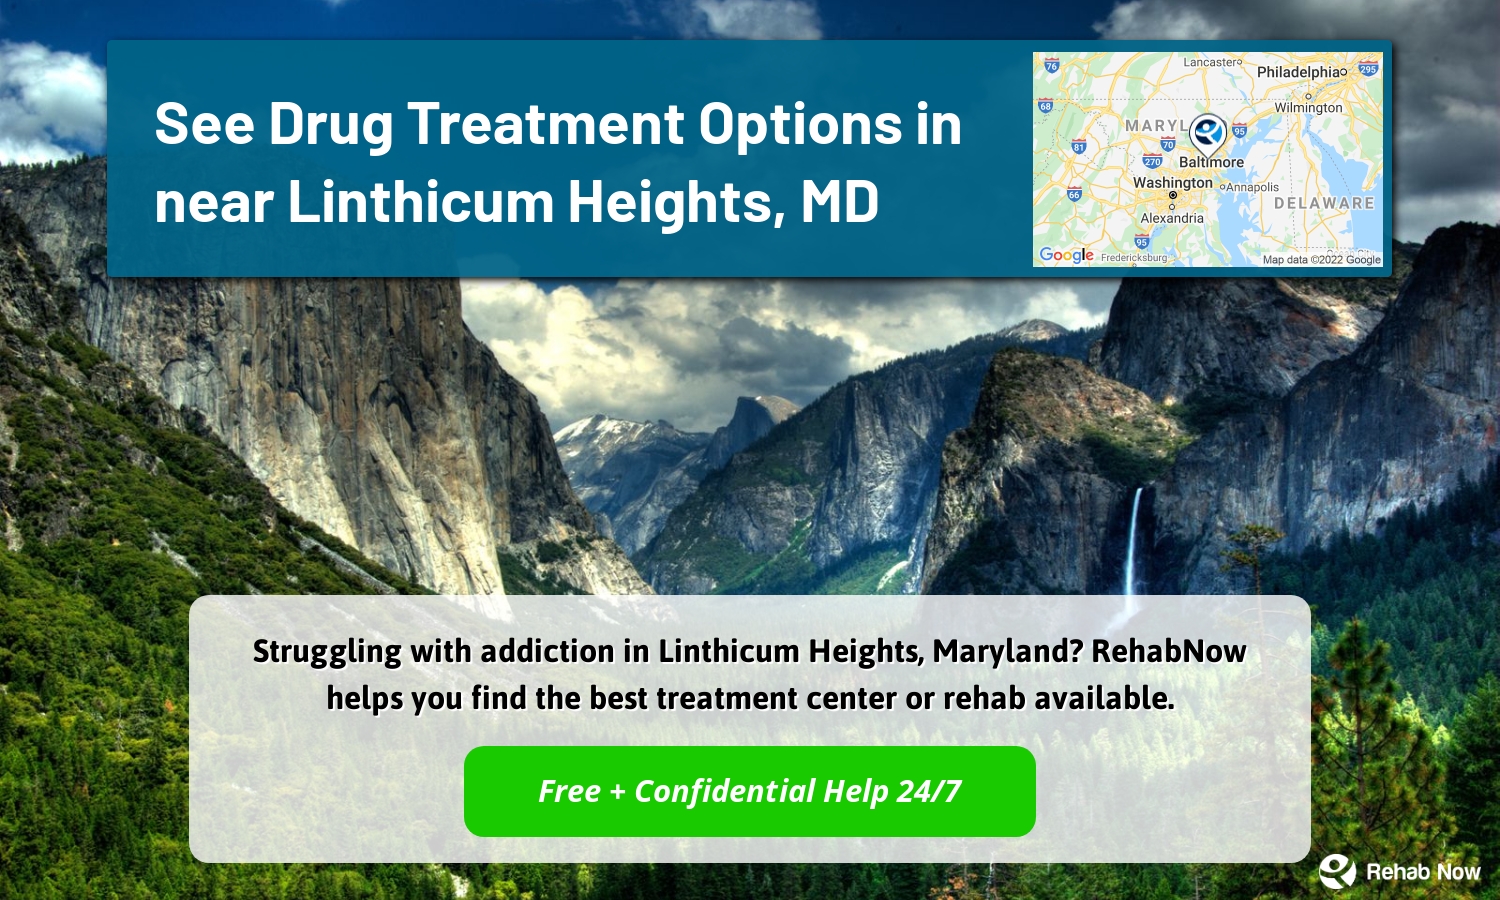 Struggling with addiction in Linthicum Heights, Maryland? RehabNow helps you find the best treatment center or rehab available.